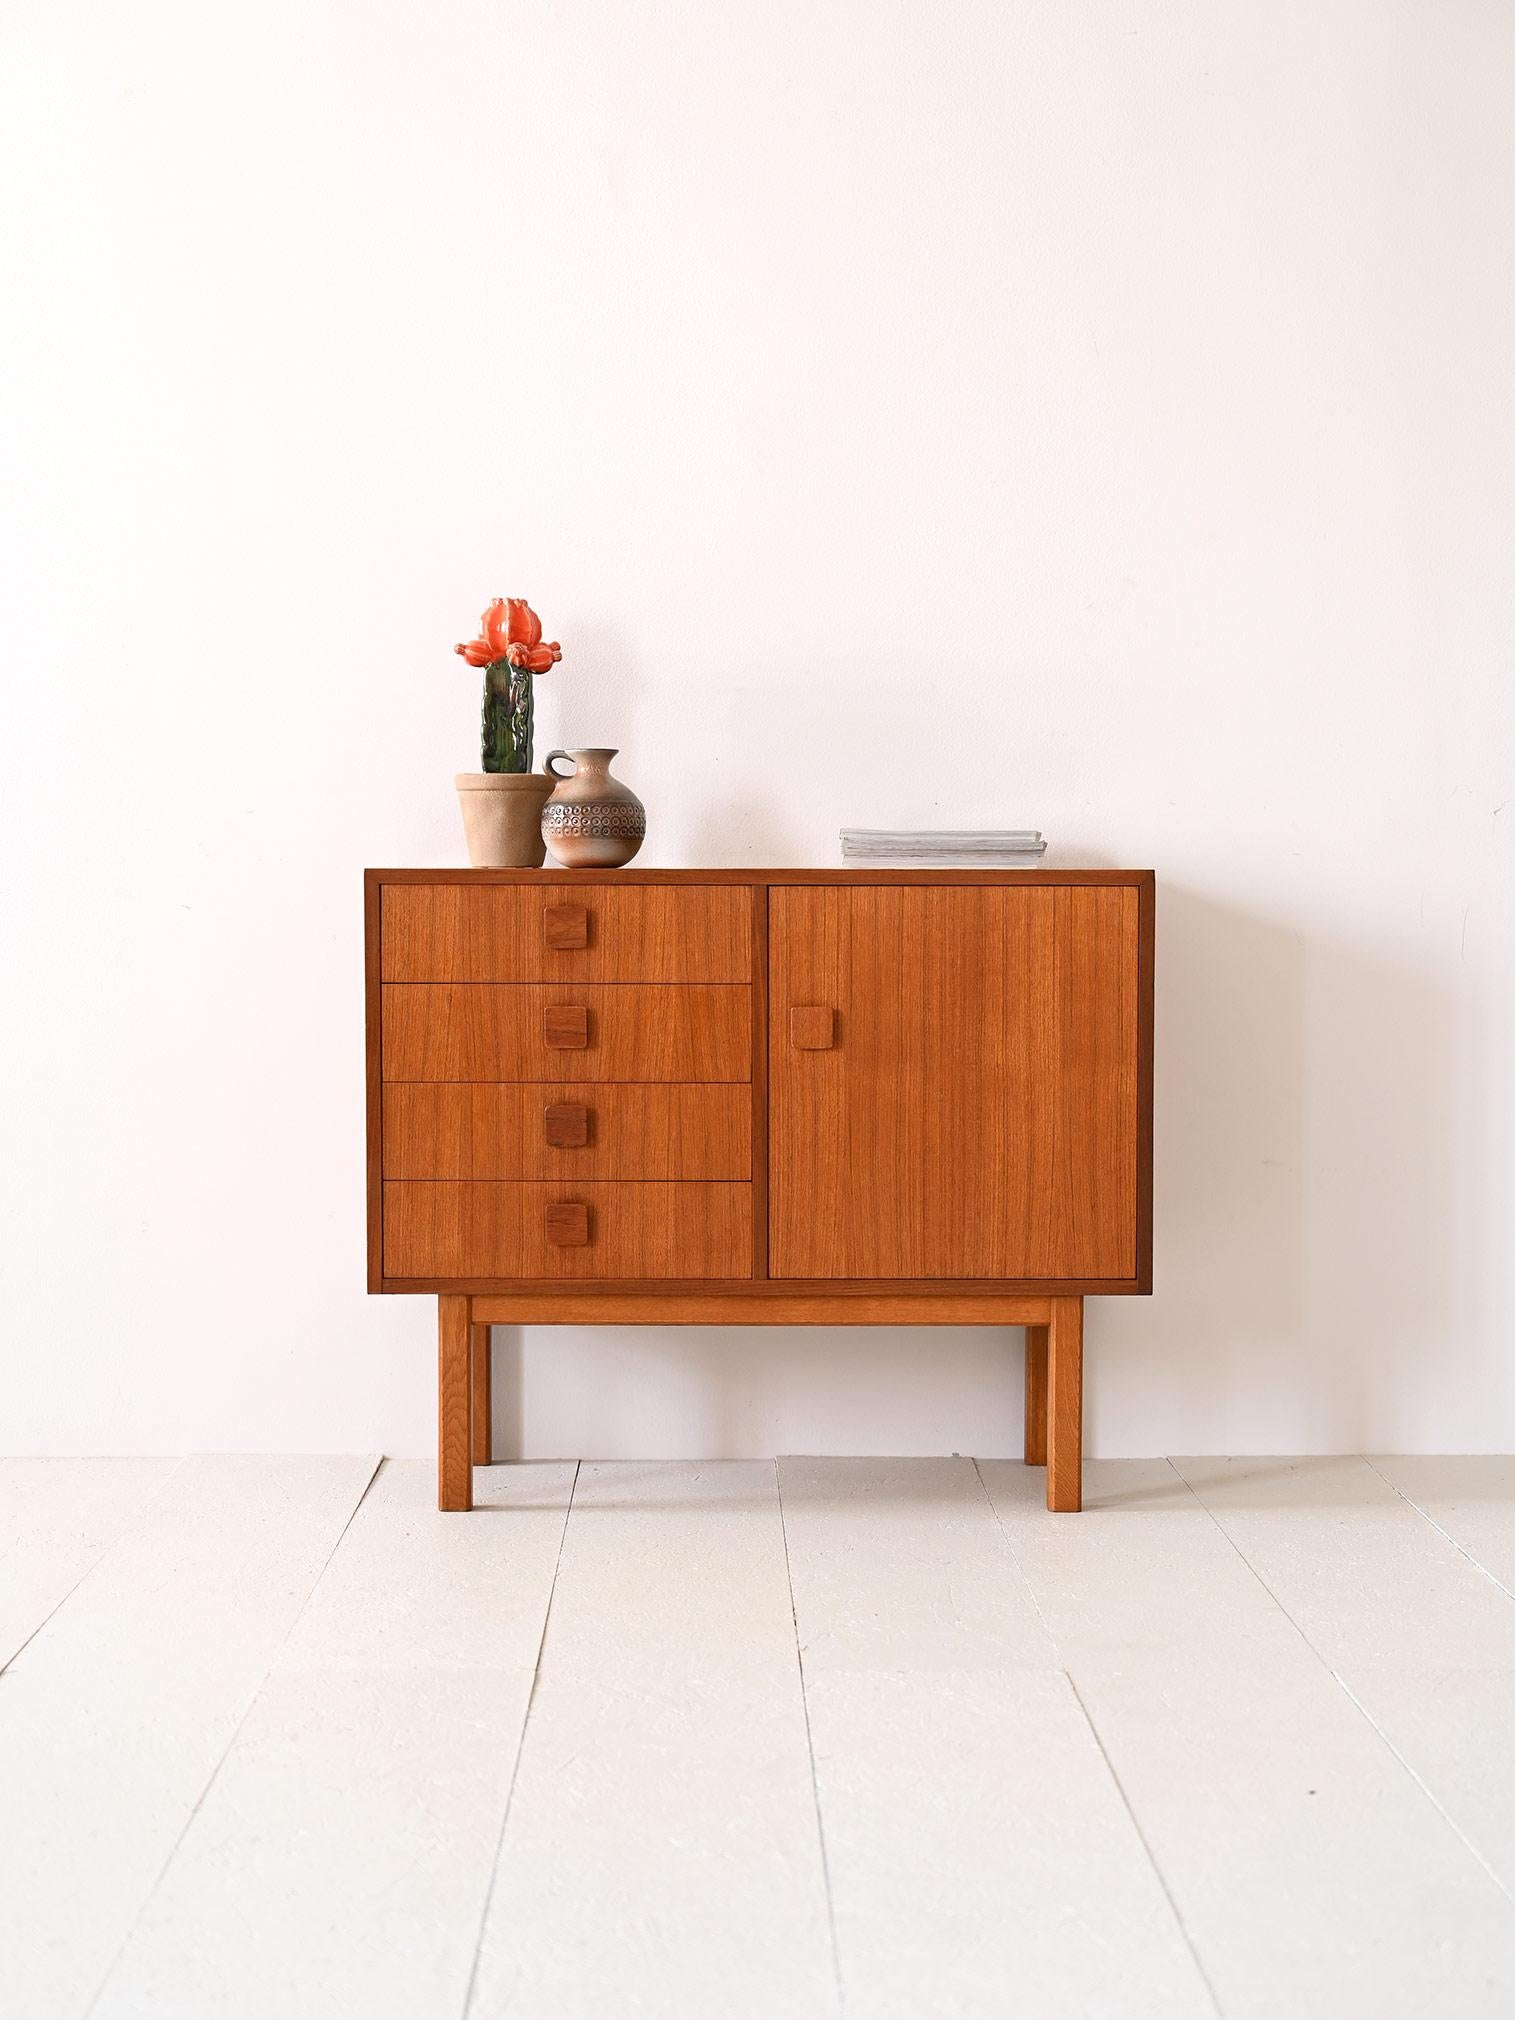 Small Scandinavian sideboard from the 1960s.

A Scandinavian modernist piece of furniture whose storage space consists of a compartment with a hinged door on one side and 4 drawers on the other. Square-shaped wooden handles give it an original look